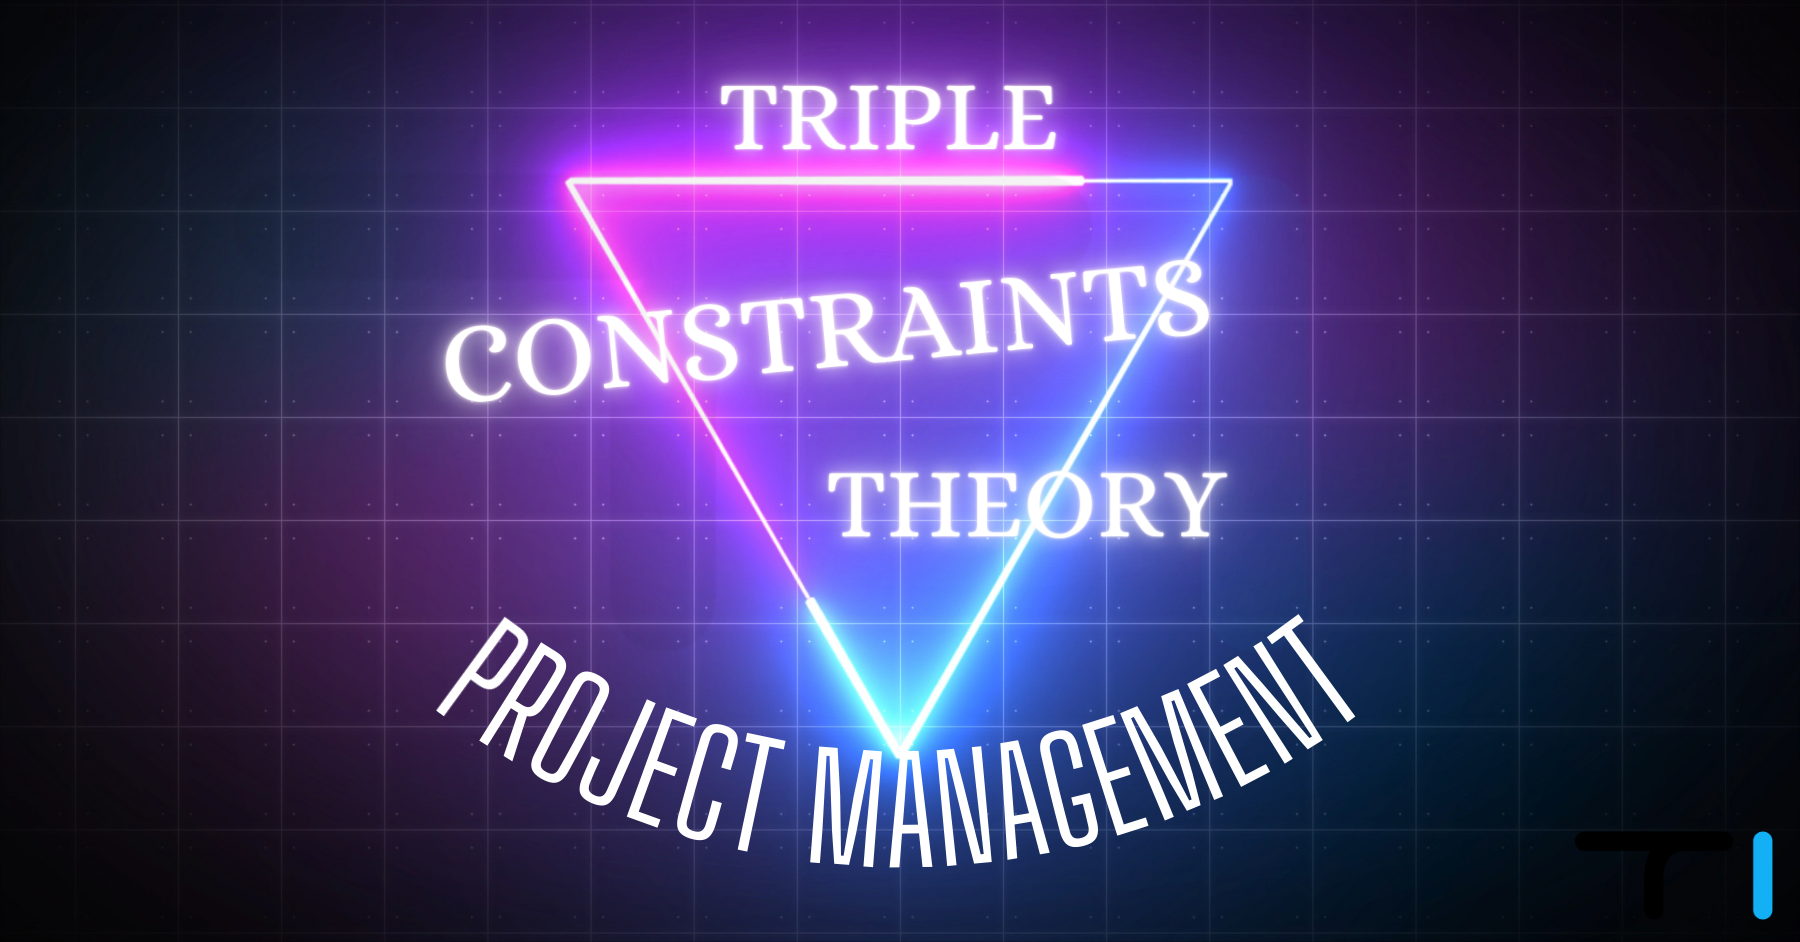 Triple Theory or Golden Triangle of Project Management